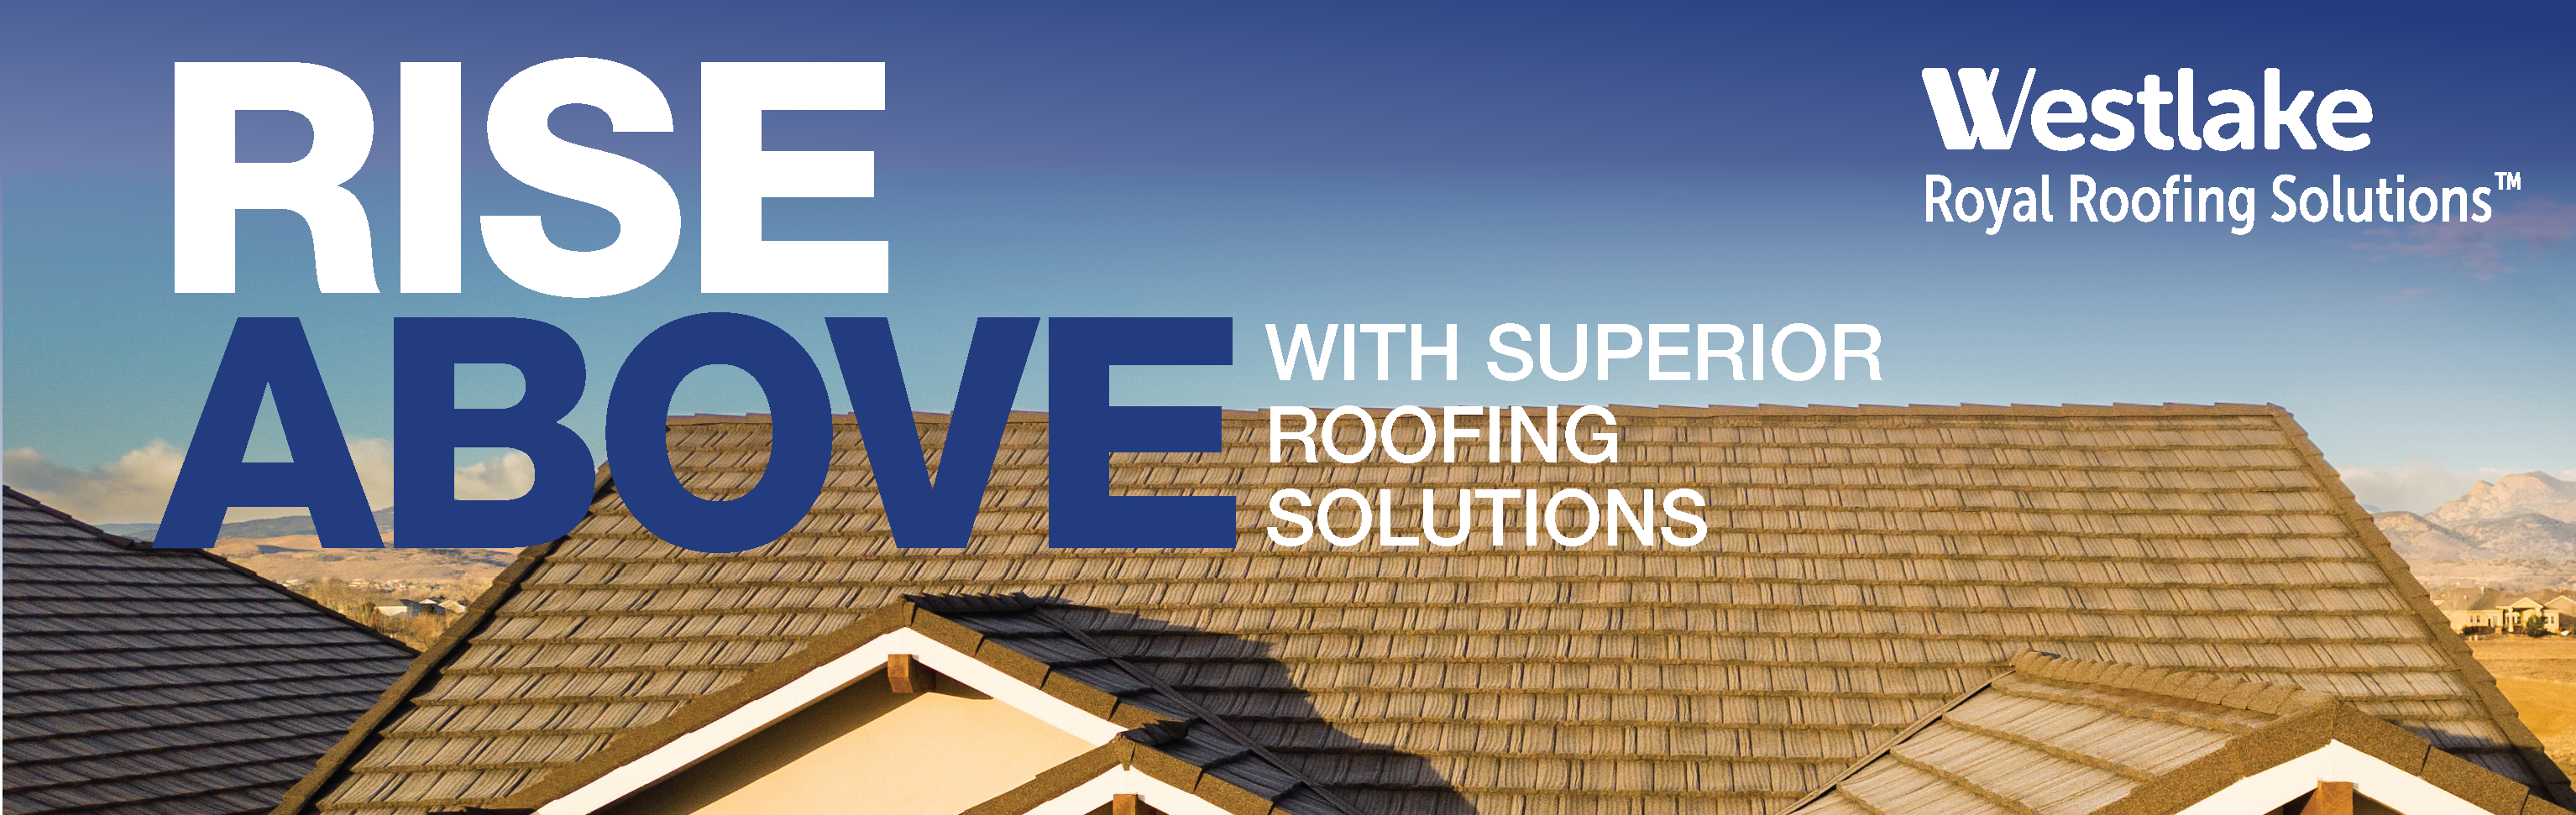 Westlake Royal Roofing Solutions - Billboard Ad - Rise Above With Superior Roofing Solutions